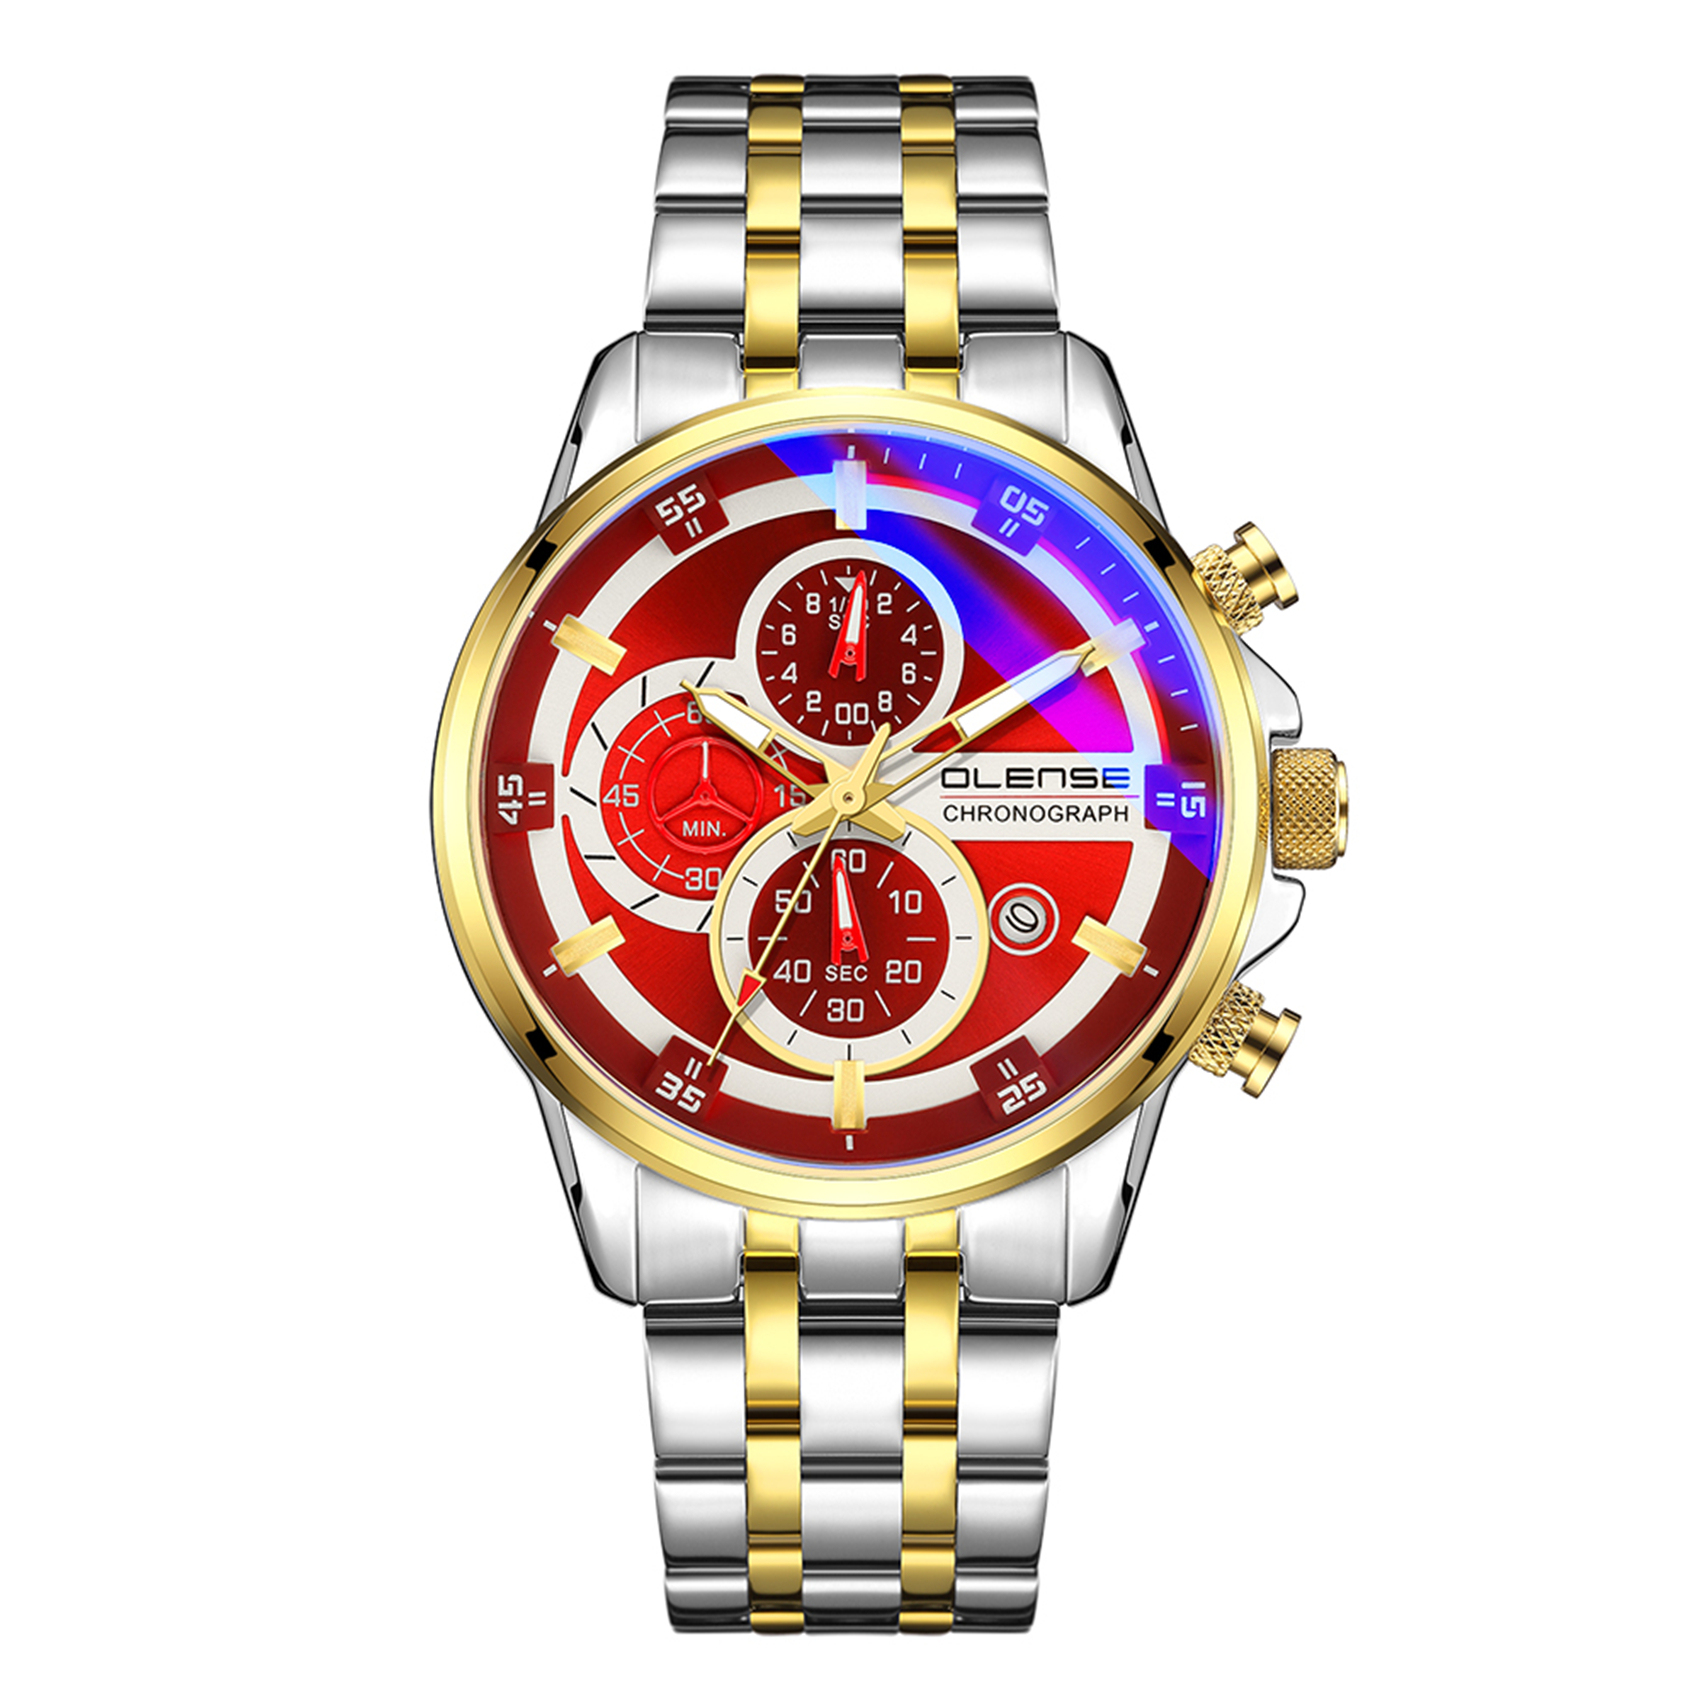 OLENSE - Sports Watch for Men,Chronograph, 47mm, Red Dial, Silver & Gold Band